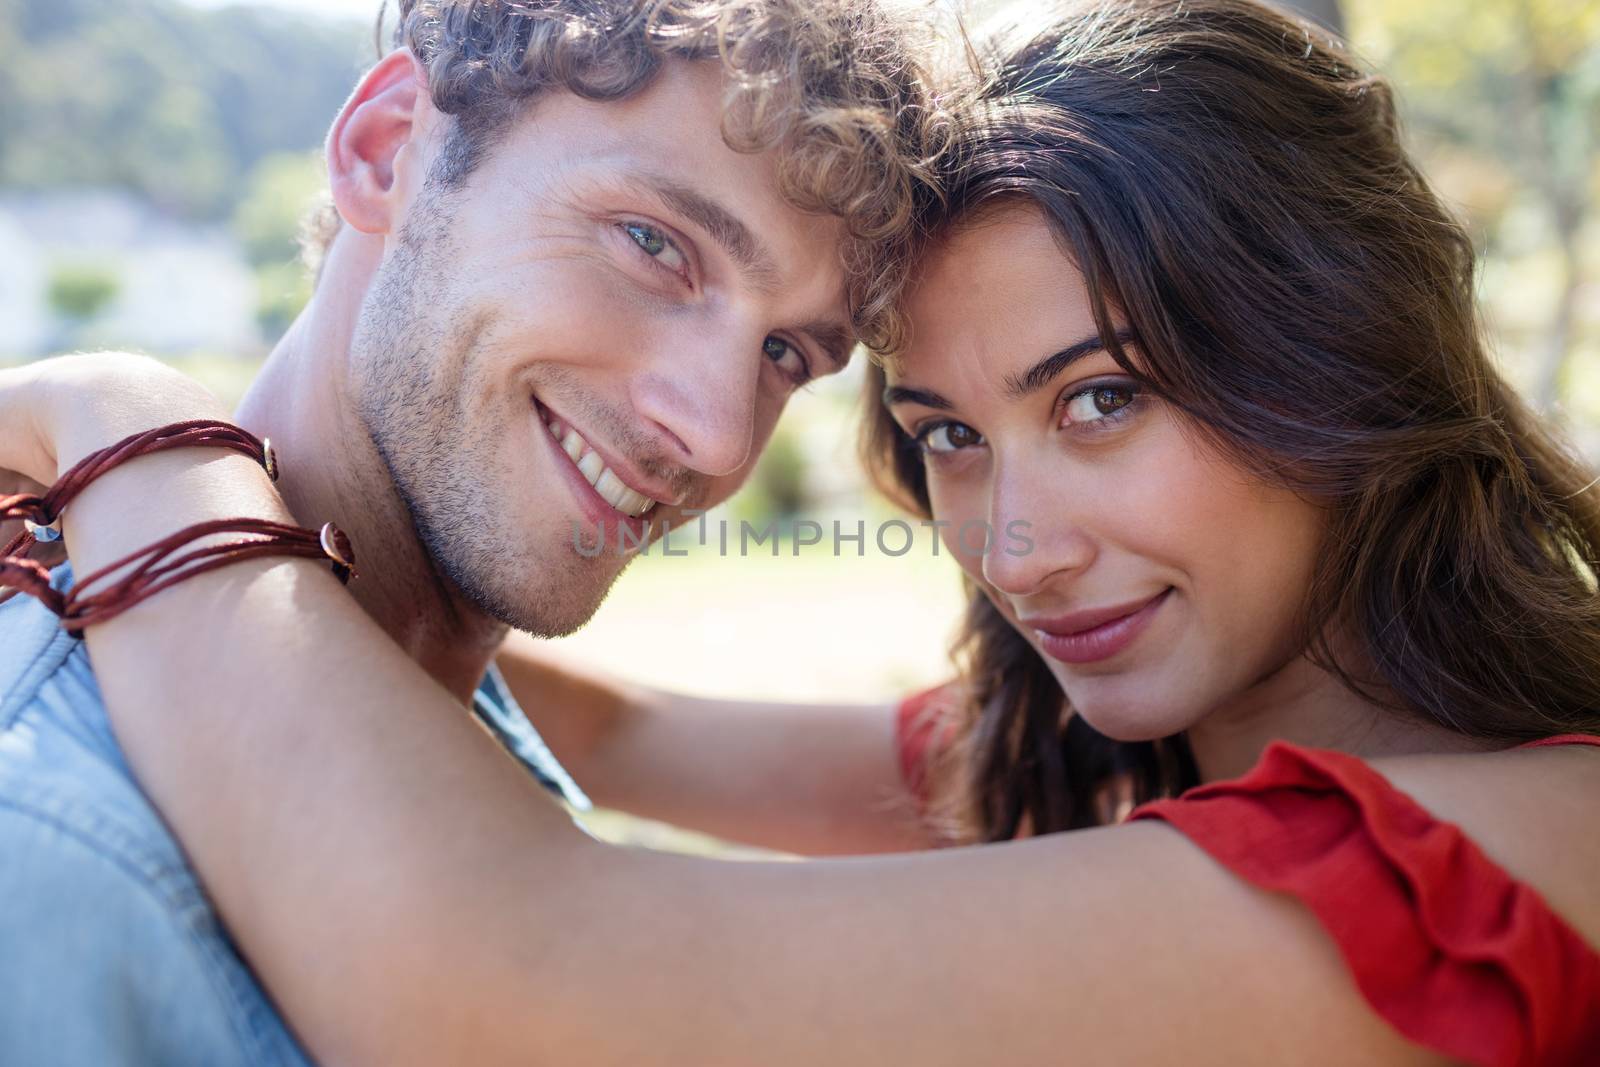 Portrait of romantic couple embracing each other in park on a sunny day